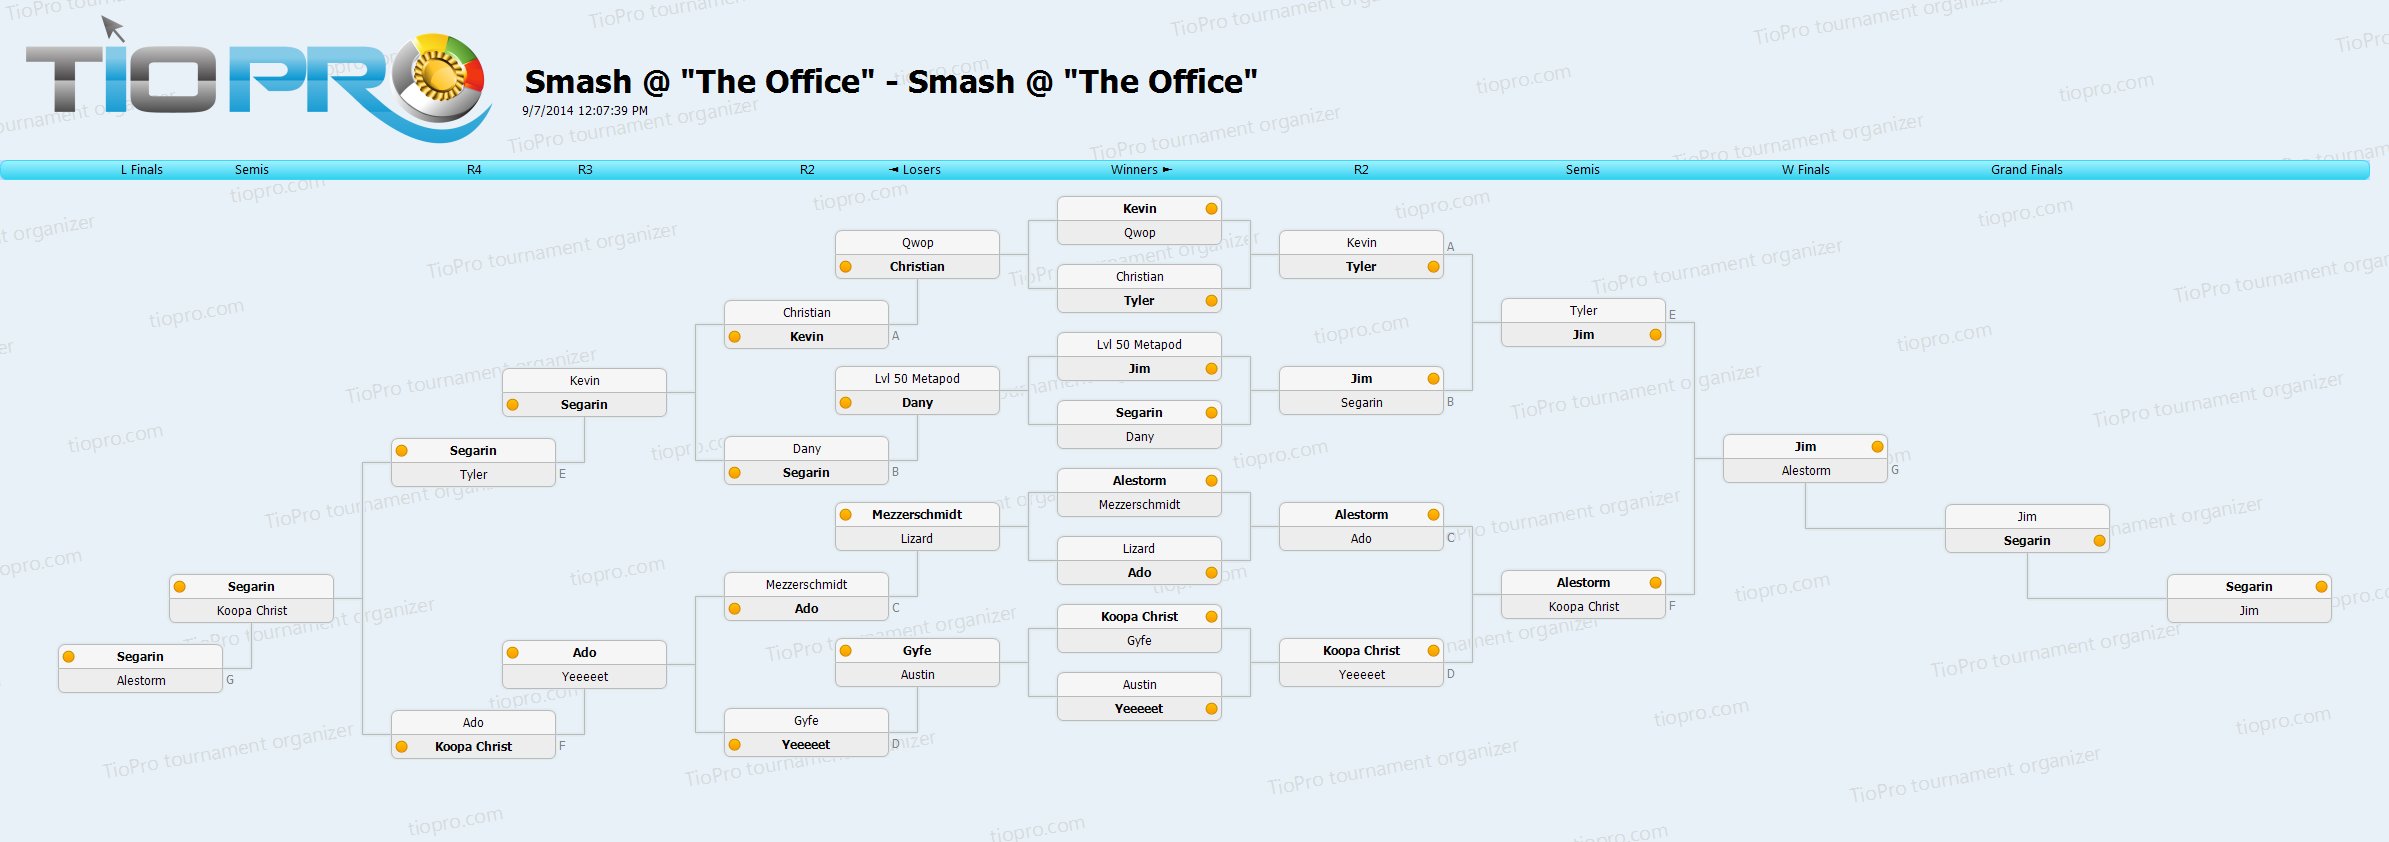 Smash @ "The Office"